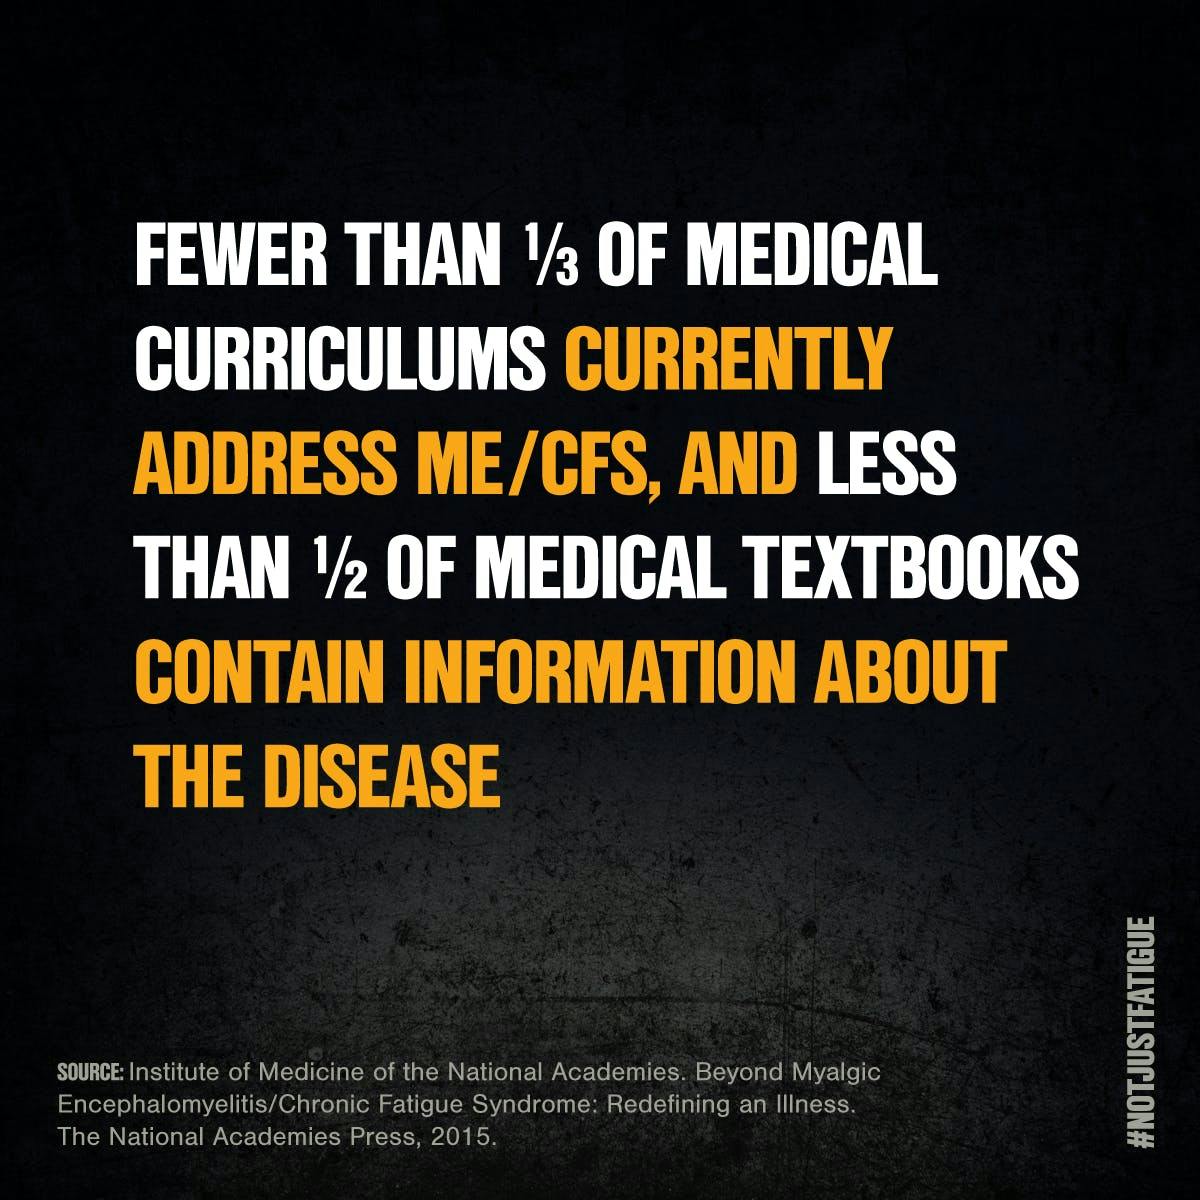 Fewer than 1/3 of medical curriculums currently address ME/CFS, and less than 1/2 of medical textbooks contain information about the disease